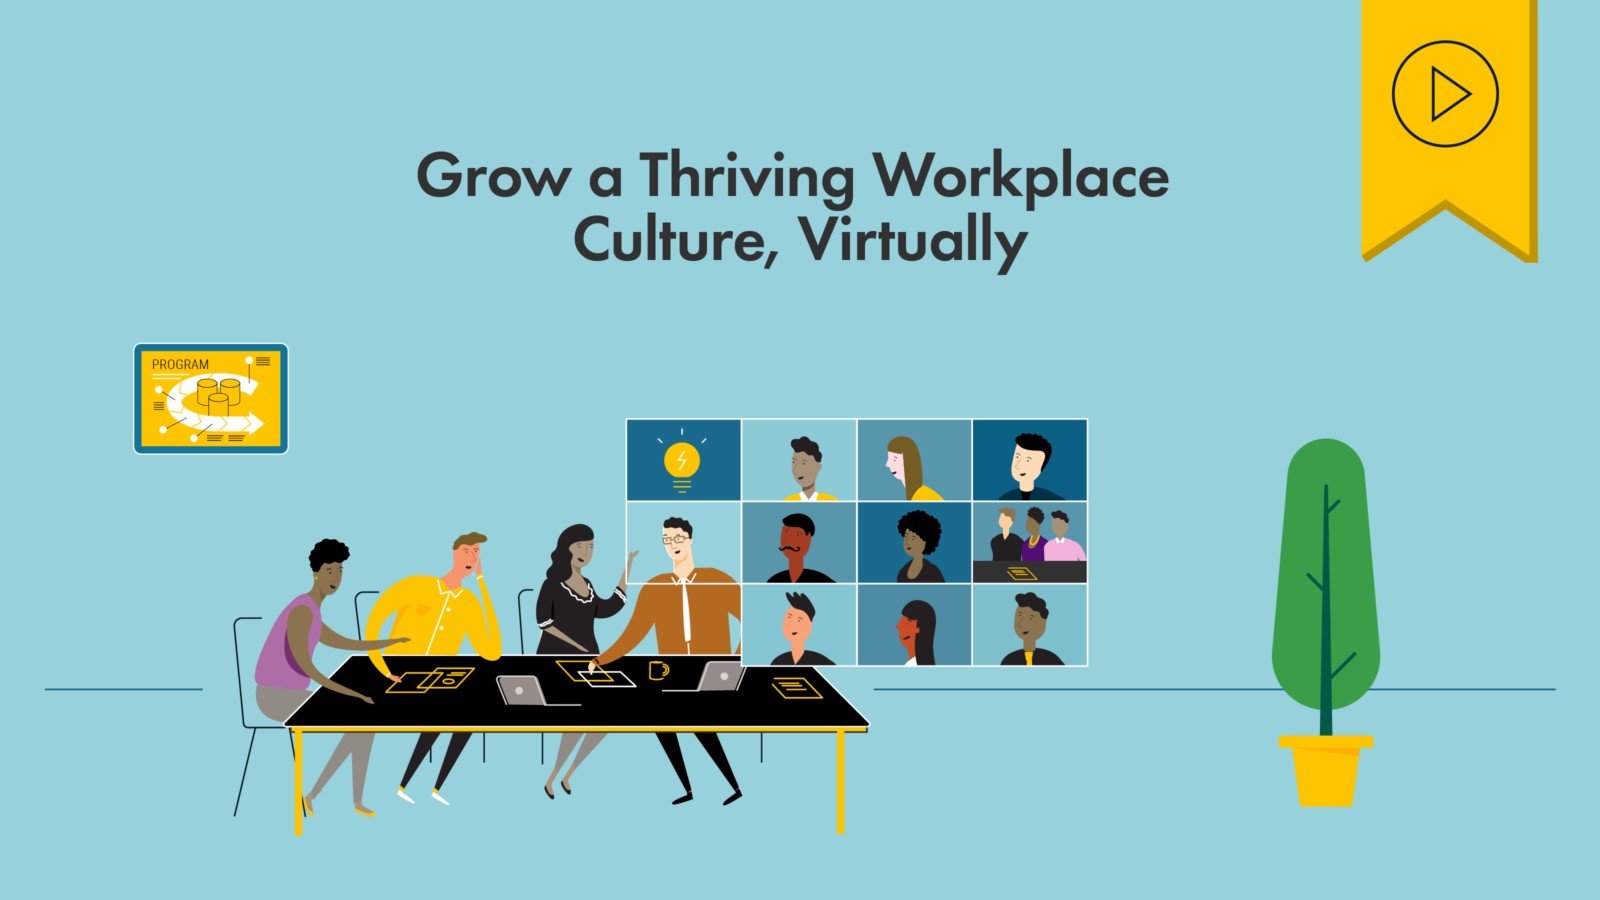 Webinar Recording: Future of Work: Grow a Thriving Workplace, Virtually ...